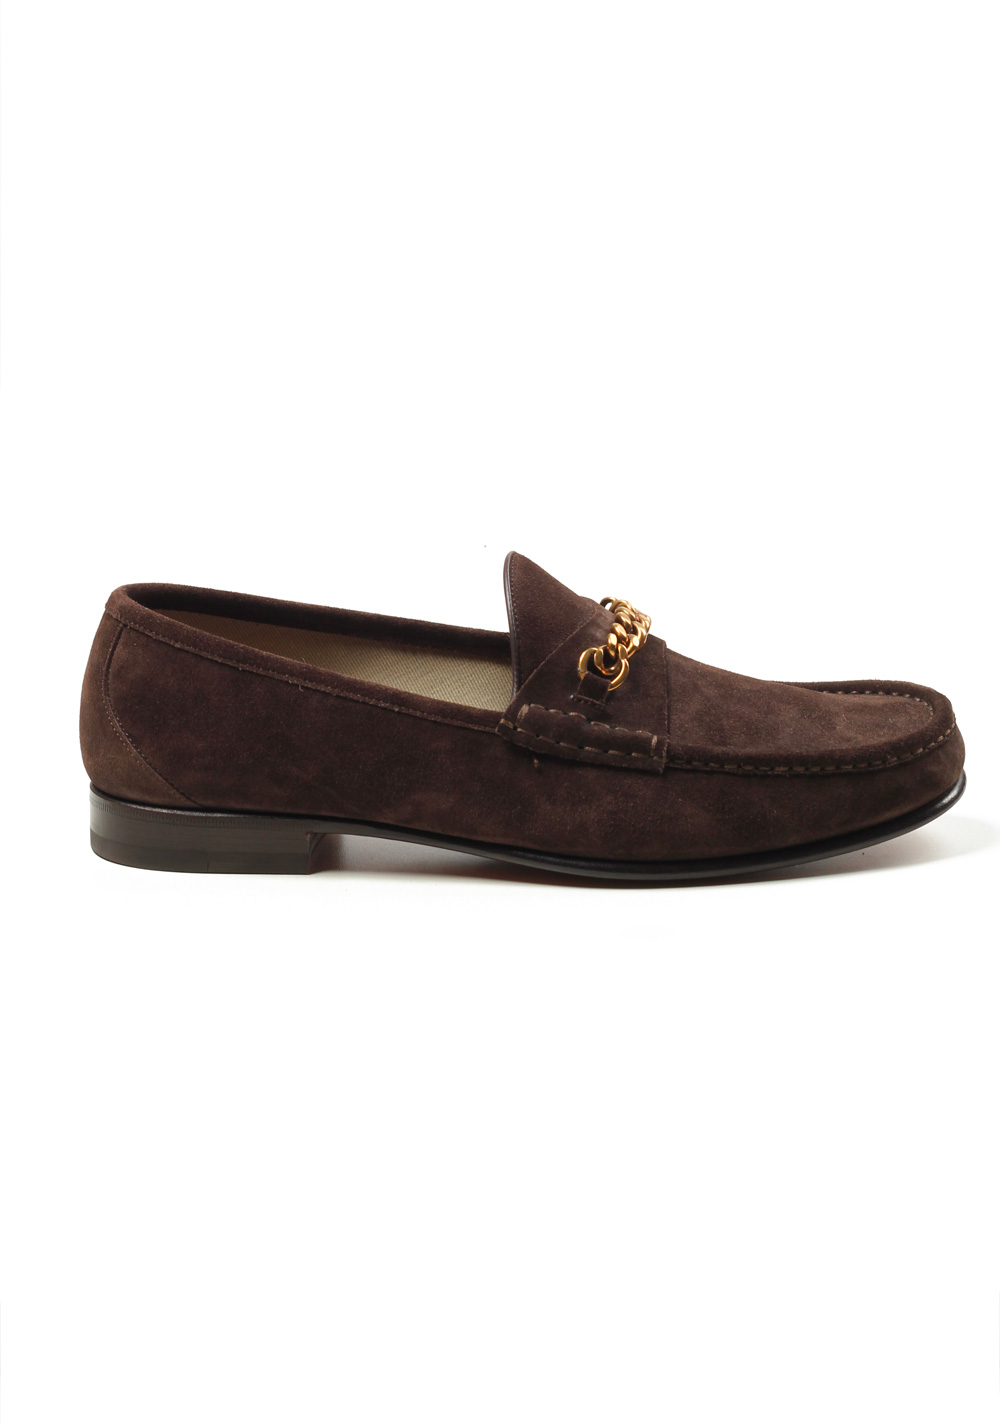 TOM FORD York Brown Suede Chain Loafers Shoes Size 8,5 UK / 9,5 U.S. | Costume Limité